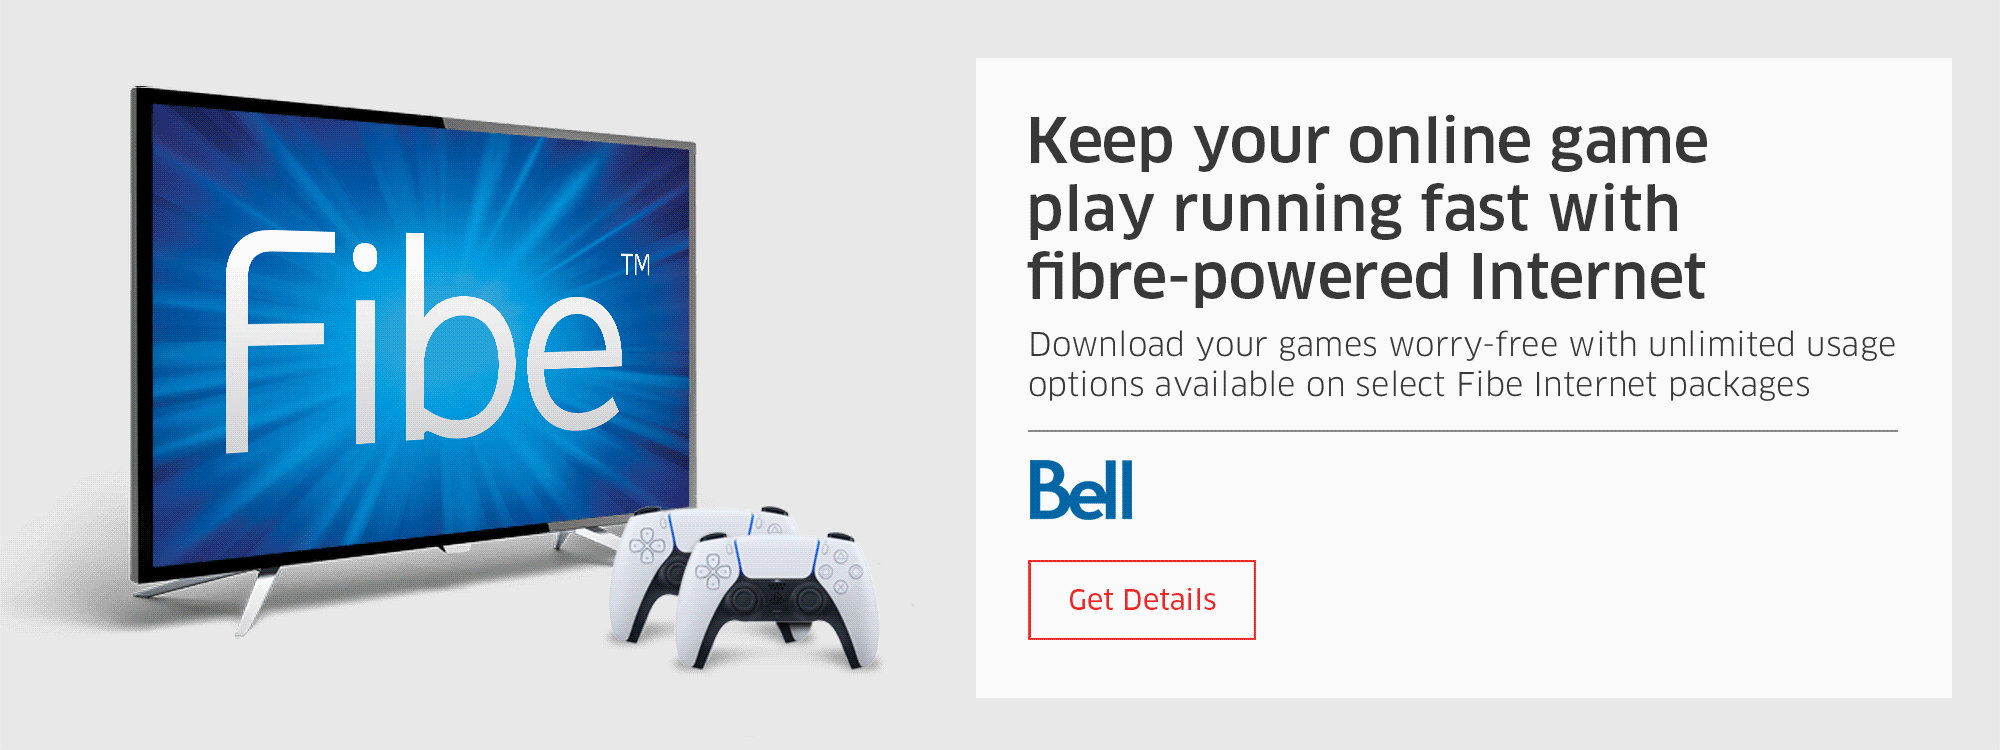 Keep your online game play running fast with fibre-powered Internet Download your games worry-free with unlimited usage options available on select Fibe Internet packages